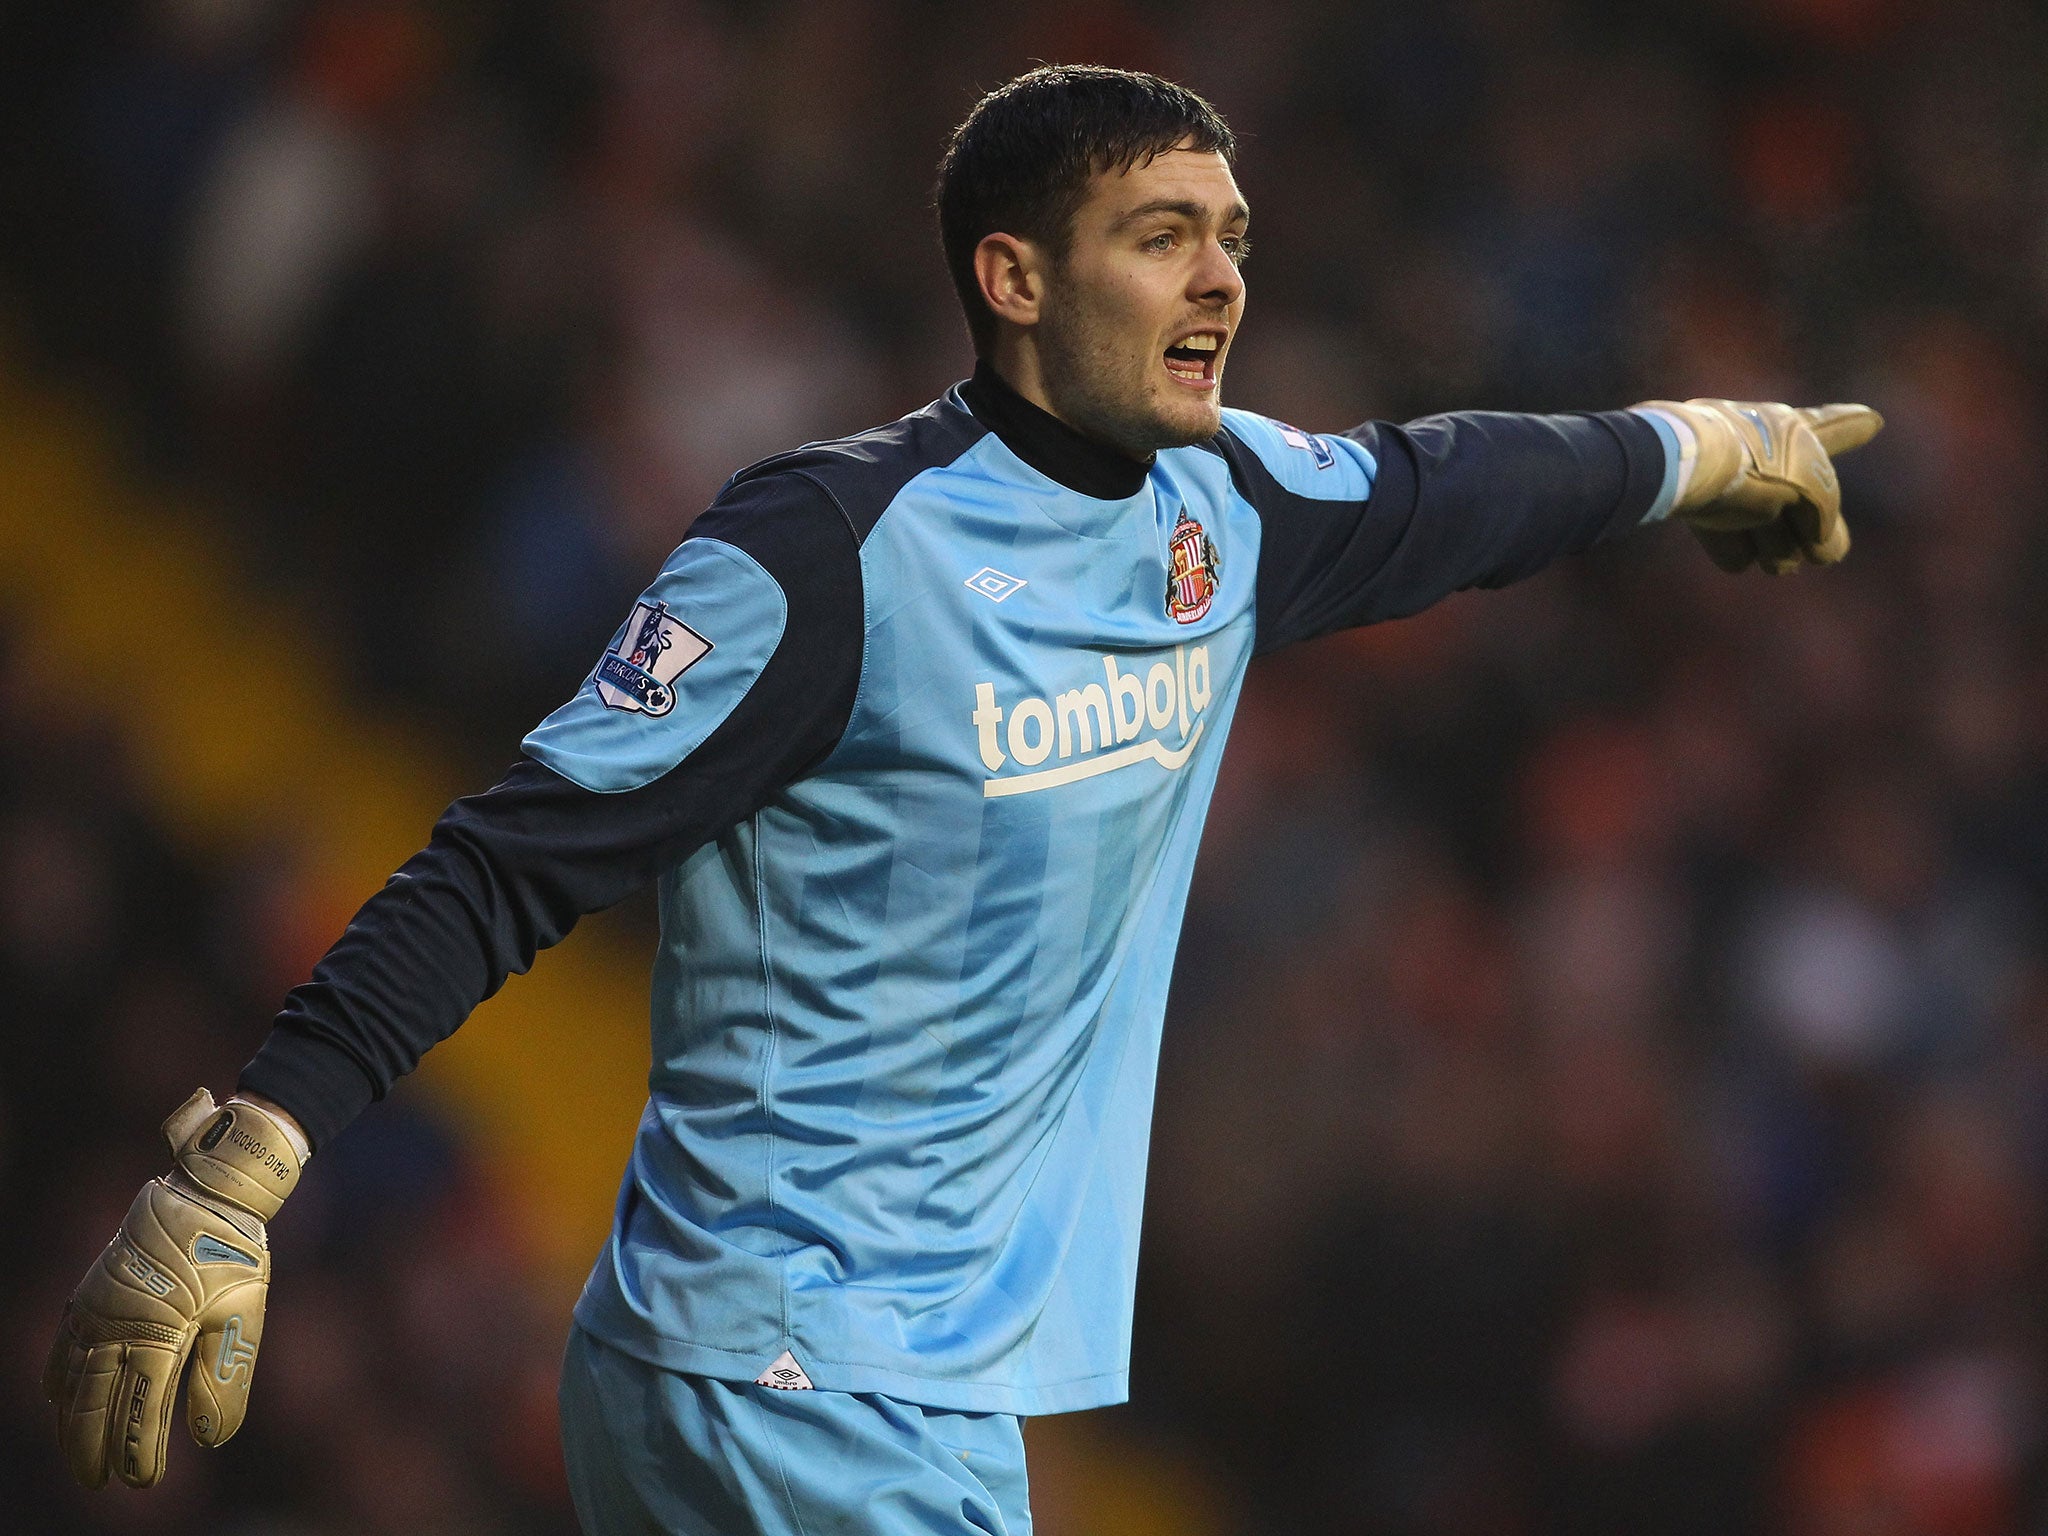 Craig Gordon of Sunderland during the Barclays Premier League match between Blackpool and Sunderland at Bloomfield Road on January 22, 2011